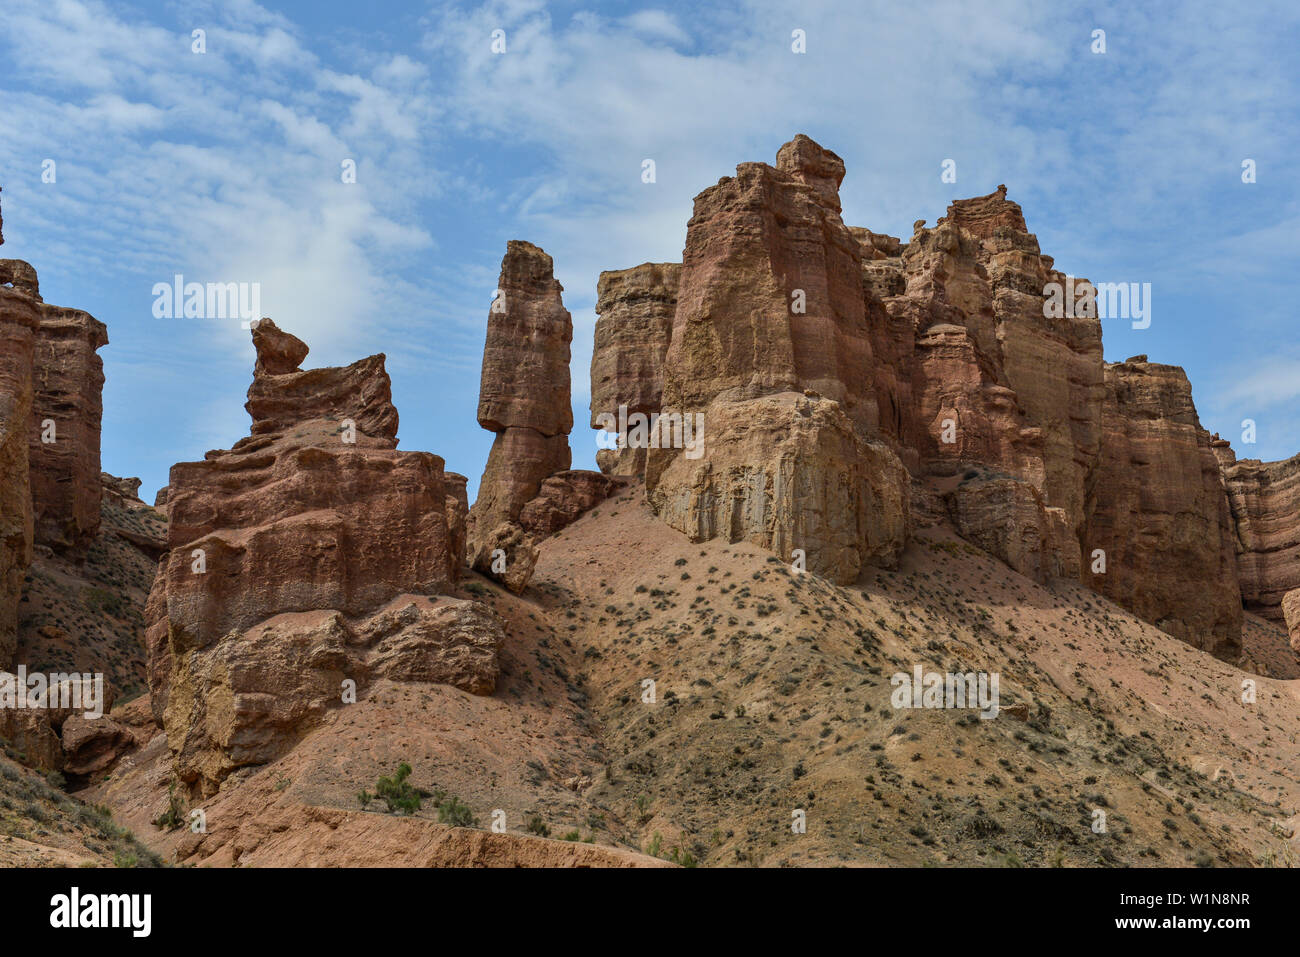 Sandstone formations at Sharyn Canyon, Valley of castles, Sharyn National Park, Almaty region, Kazakhstan, Central Asia, Asia Stock Photo